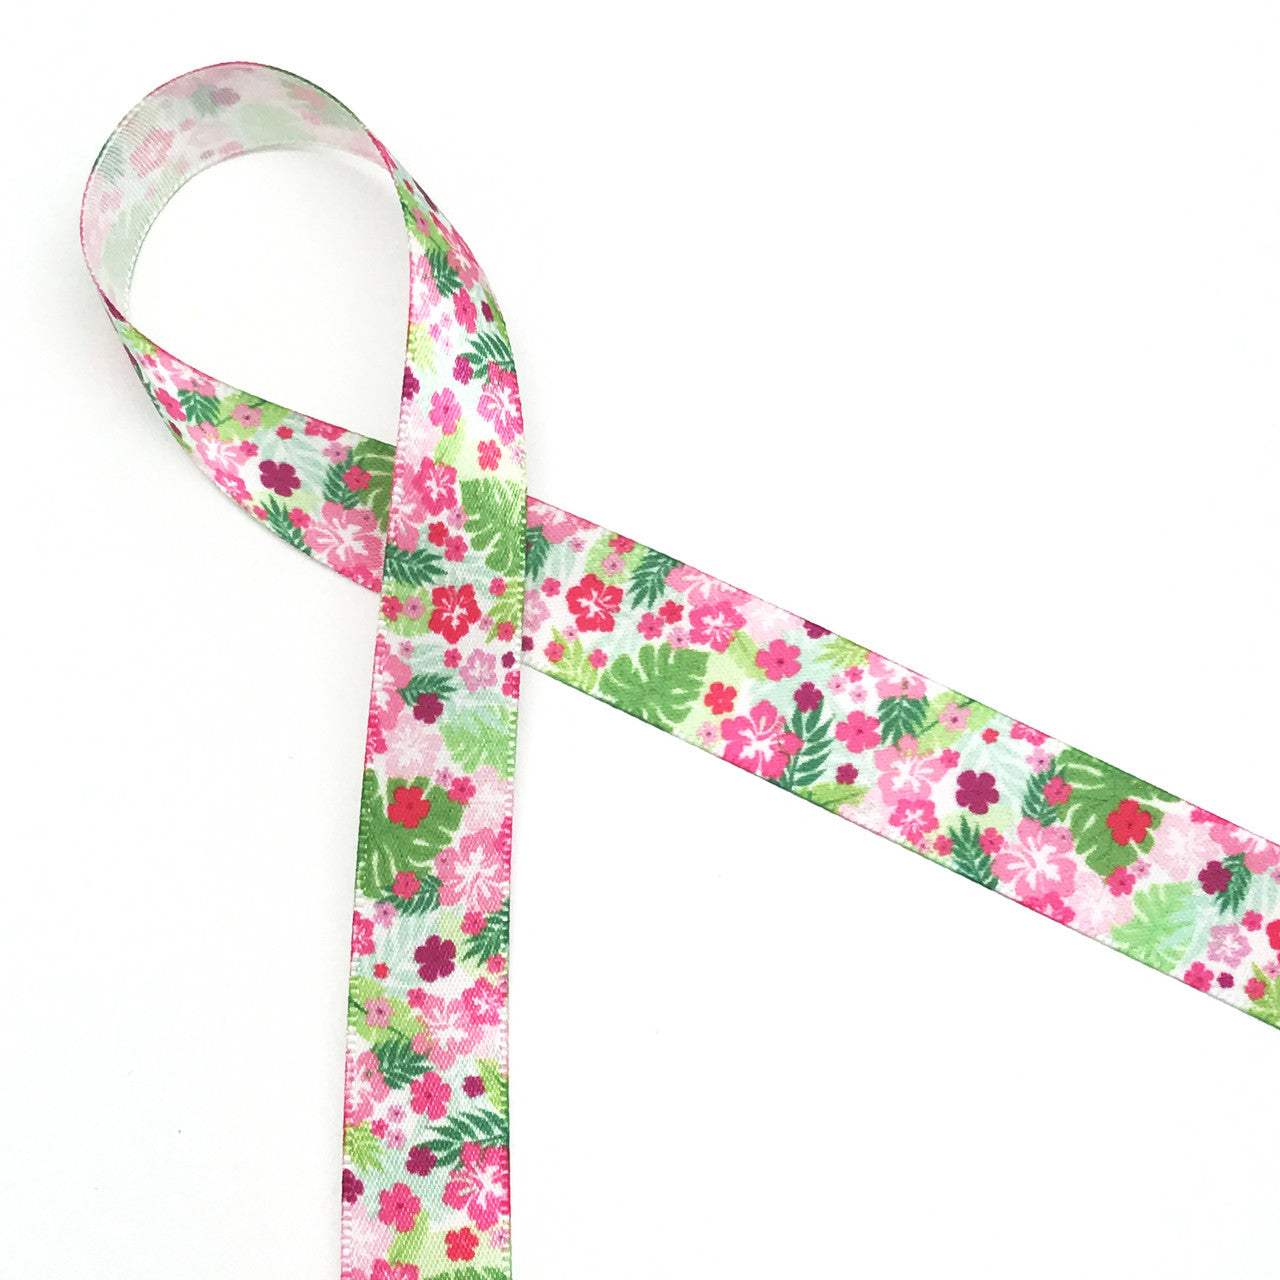 Lily inspired floral ribbon hot pink flowers with green palm fronds and ferns printed on 5/8" and 1.5" white single face satin